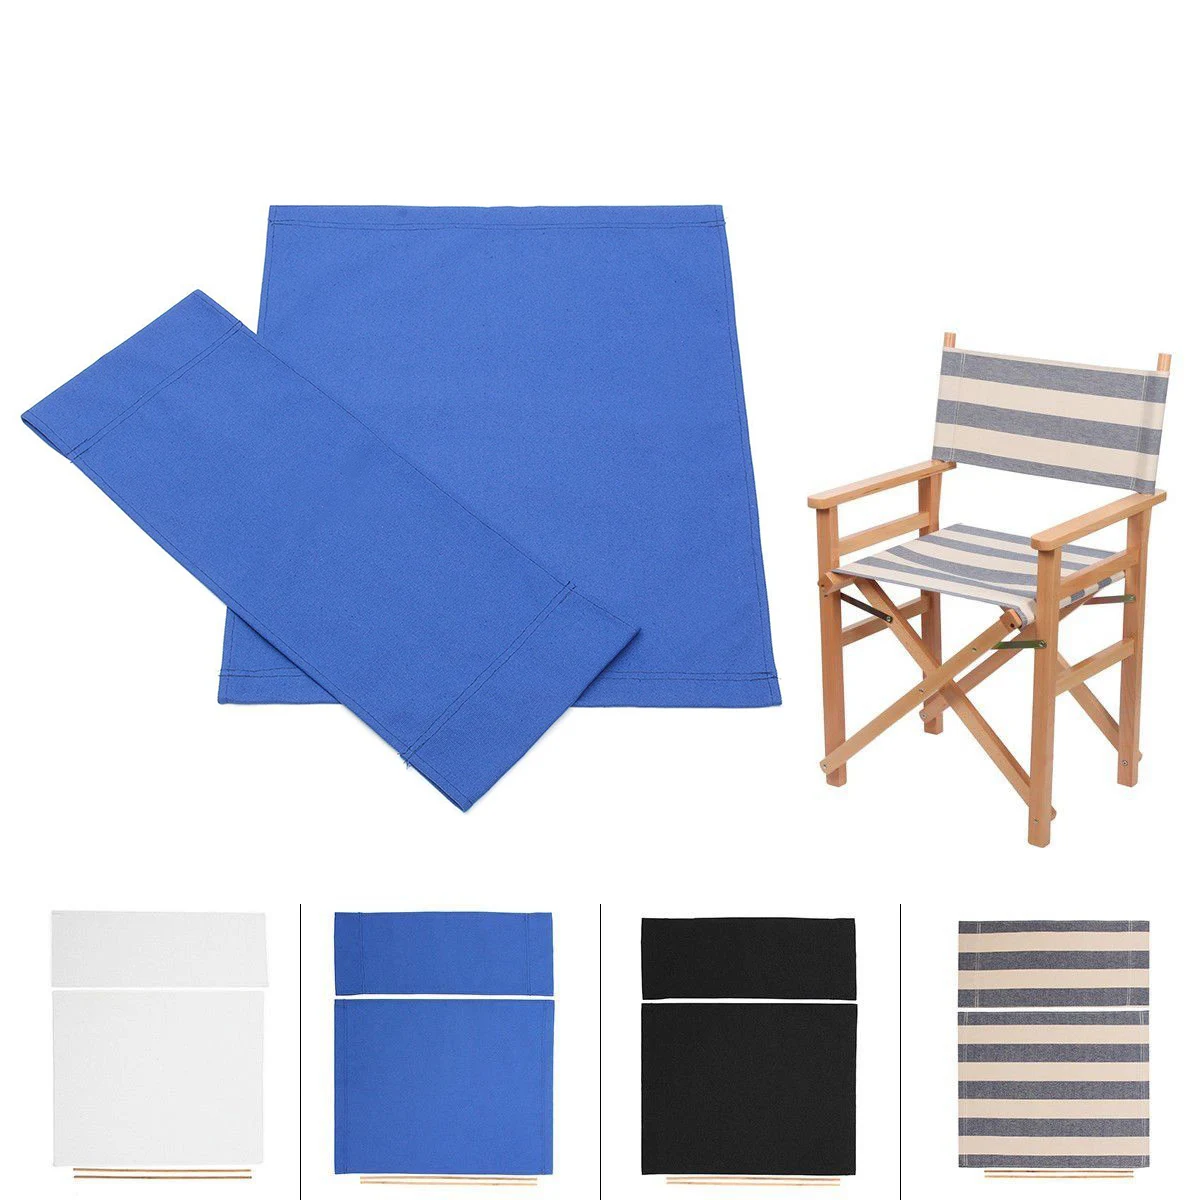 Only Covers, no Chair Verdelife Casual Directors Chairs Cover Kit Replacement Seat Cover for Directors Chair Stool Protector 